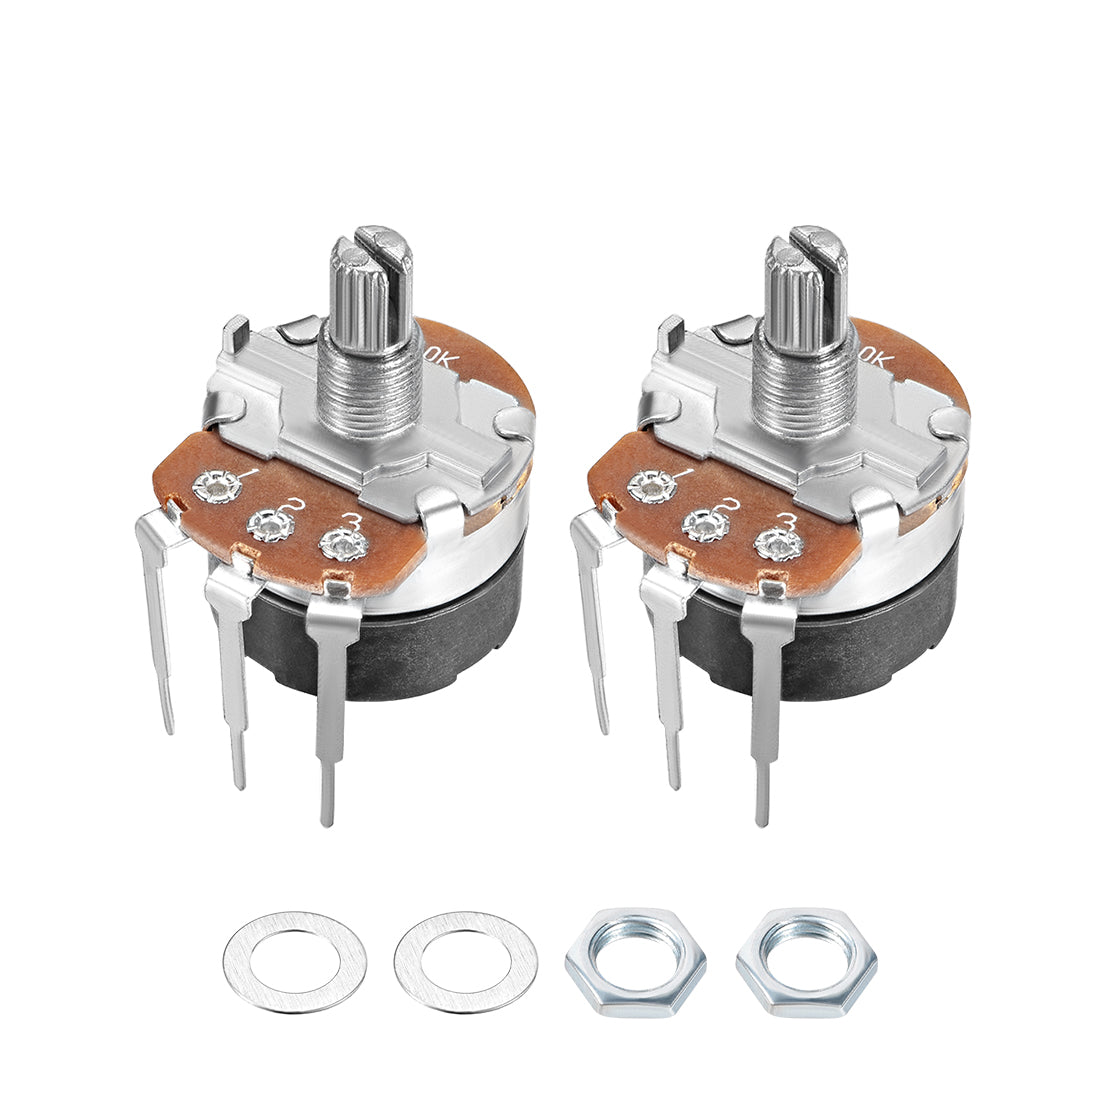 uxcell Uxcell WH138 Potentiometer with Switch 5K Ohm Variable Resistors Single Turn Rotary Carbon Film Taper 2pcs